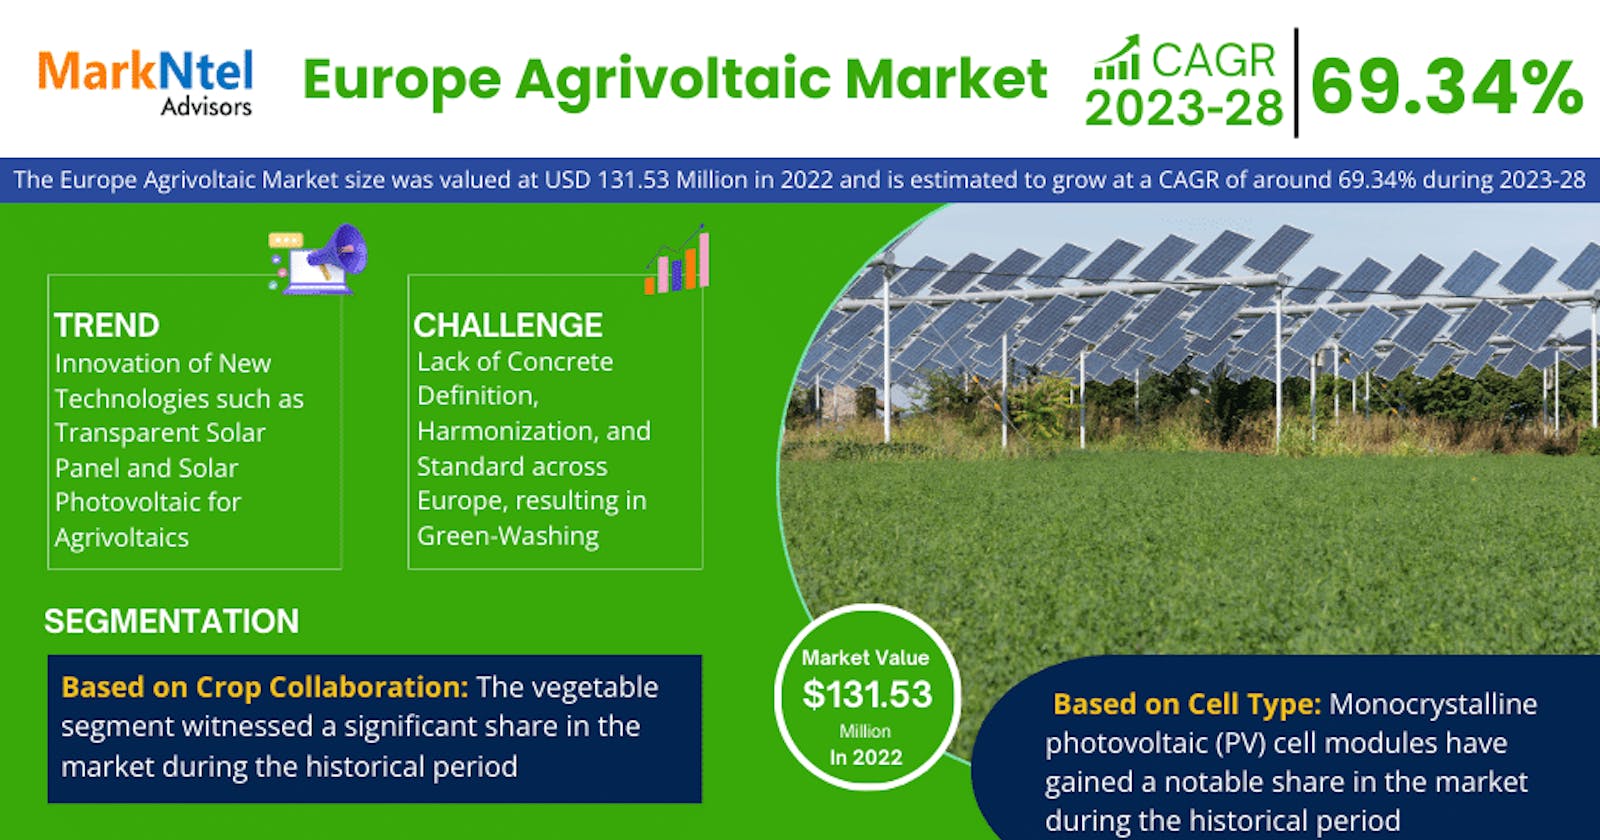 Europe Agrivoltaic Market Share, Size, and Growth Forecast: 69.34% CAGR (2023-28)